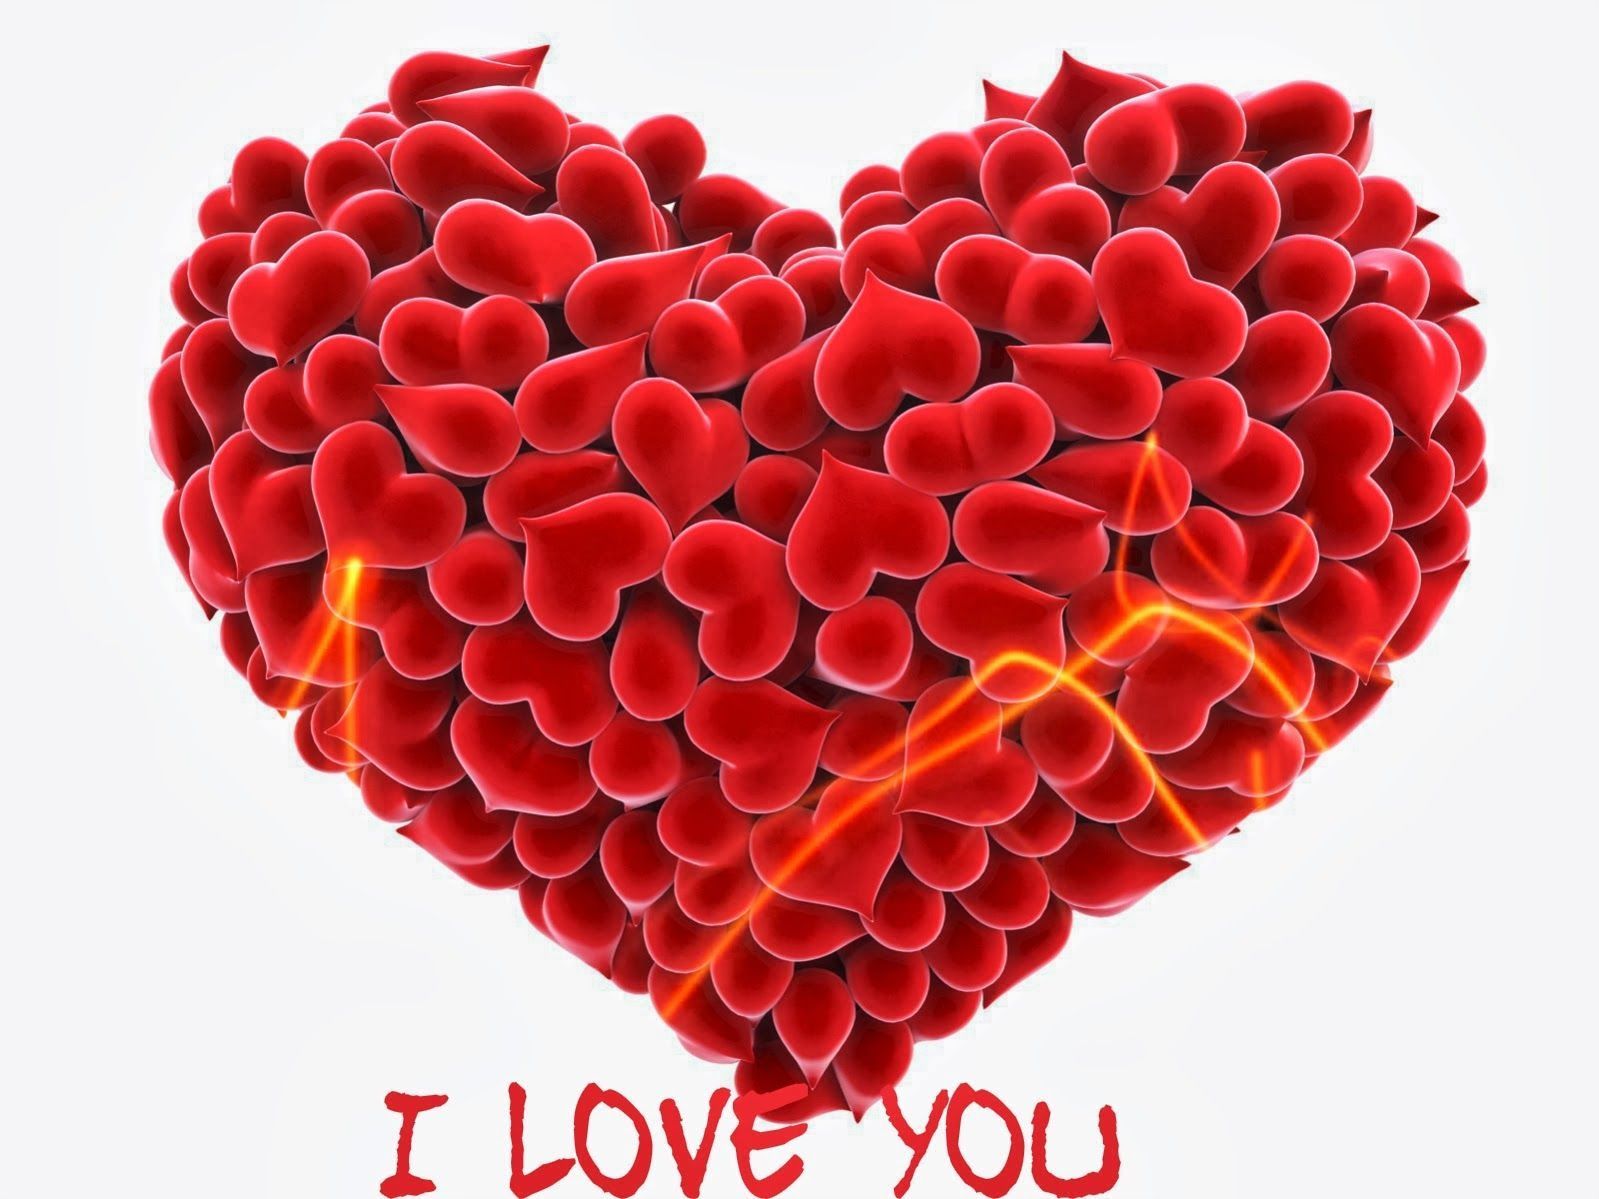 I Love You Heart Wallpaper | Live HD Wallpaper HQ Pictures, Images ...